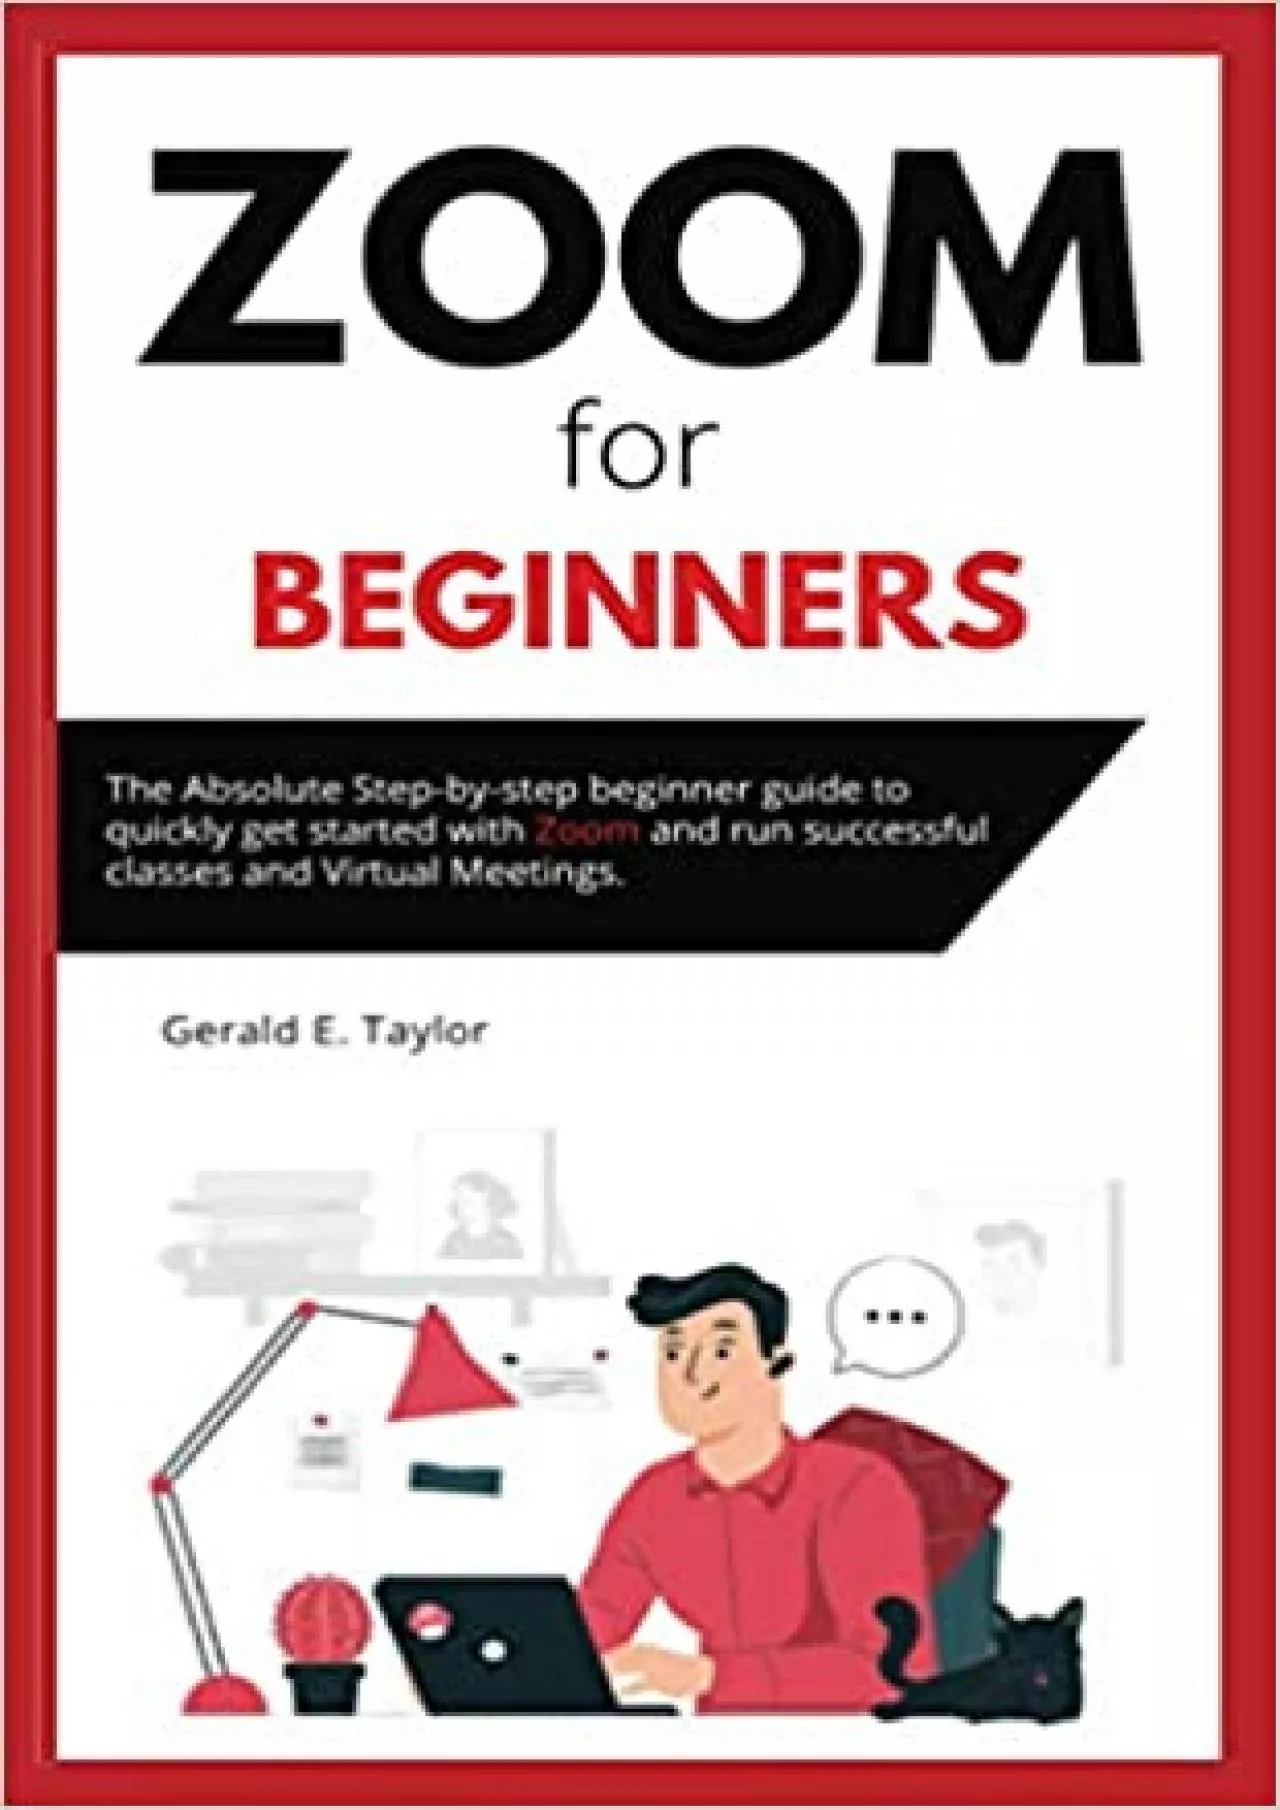 Zoom for beginners: The absolute step-by-step beginner guide to quickly get started with